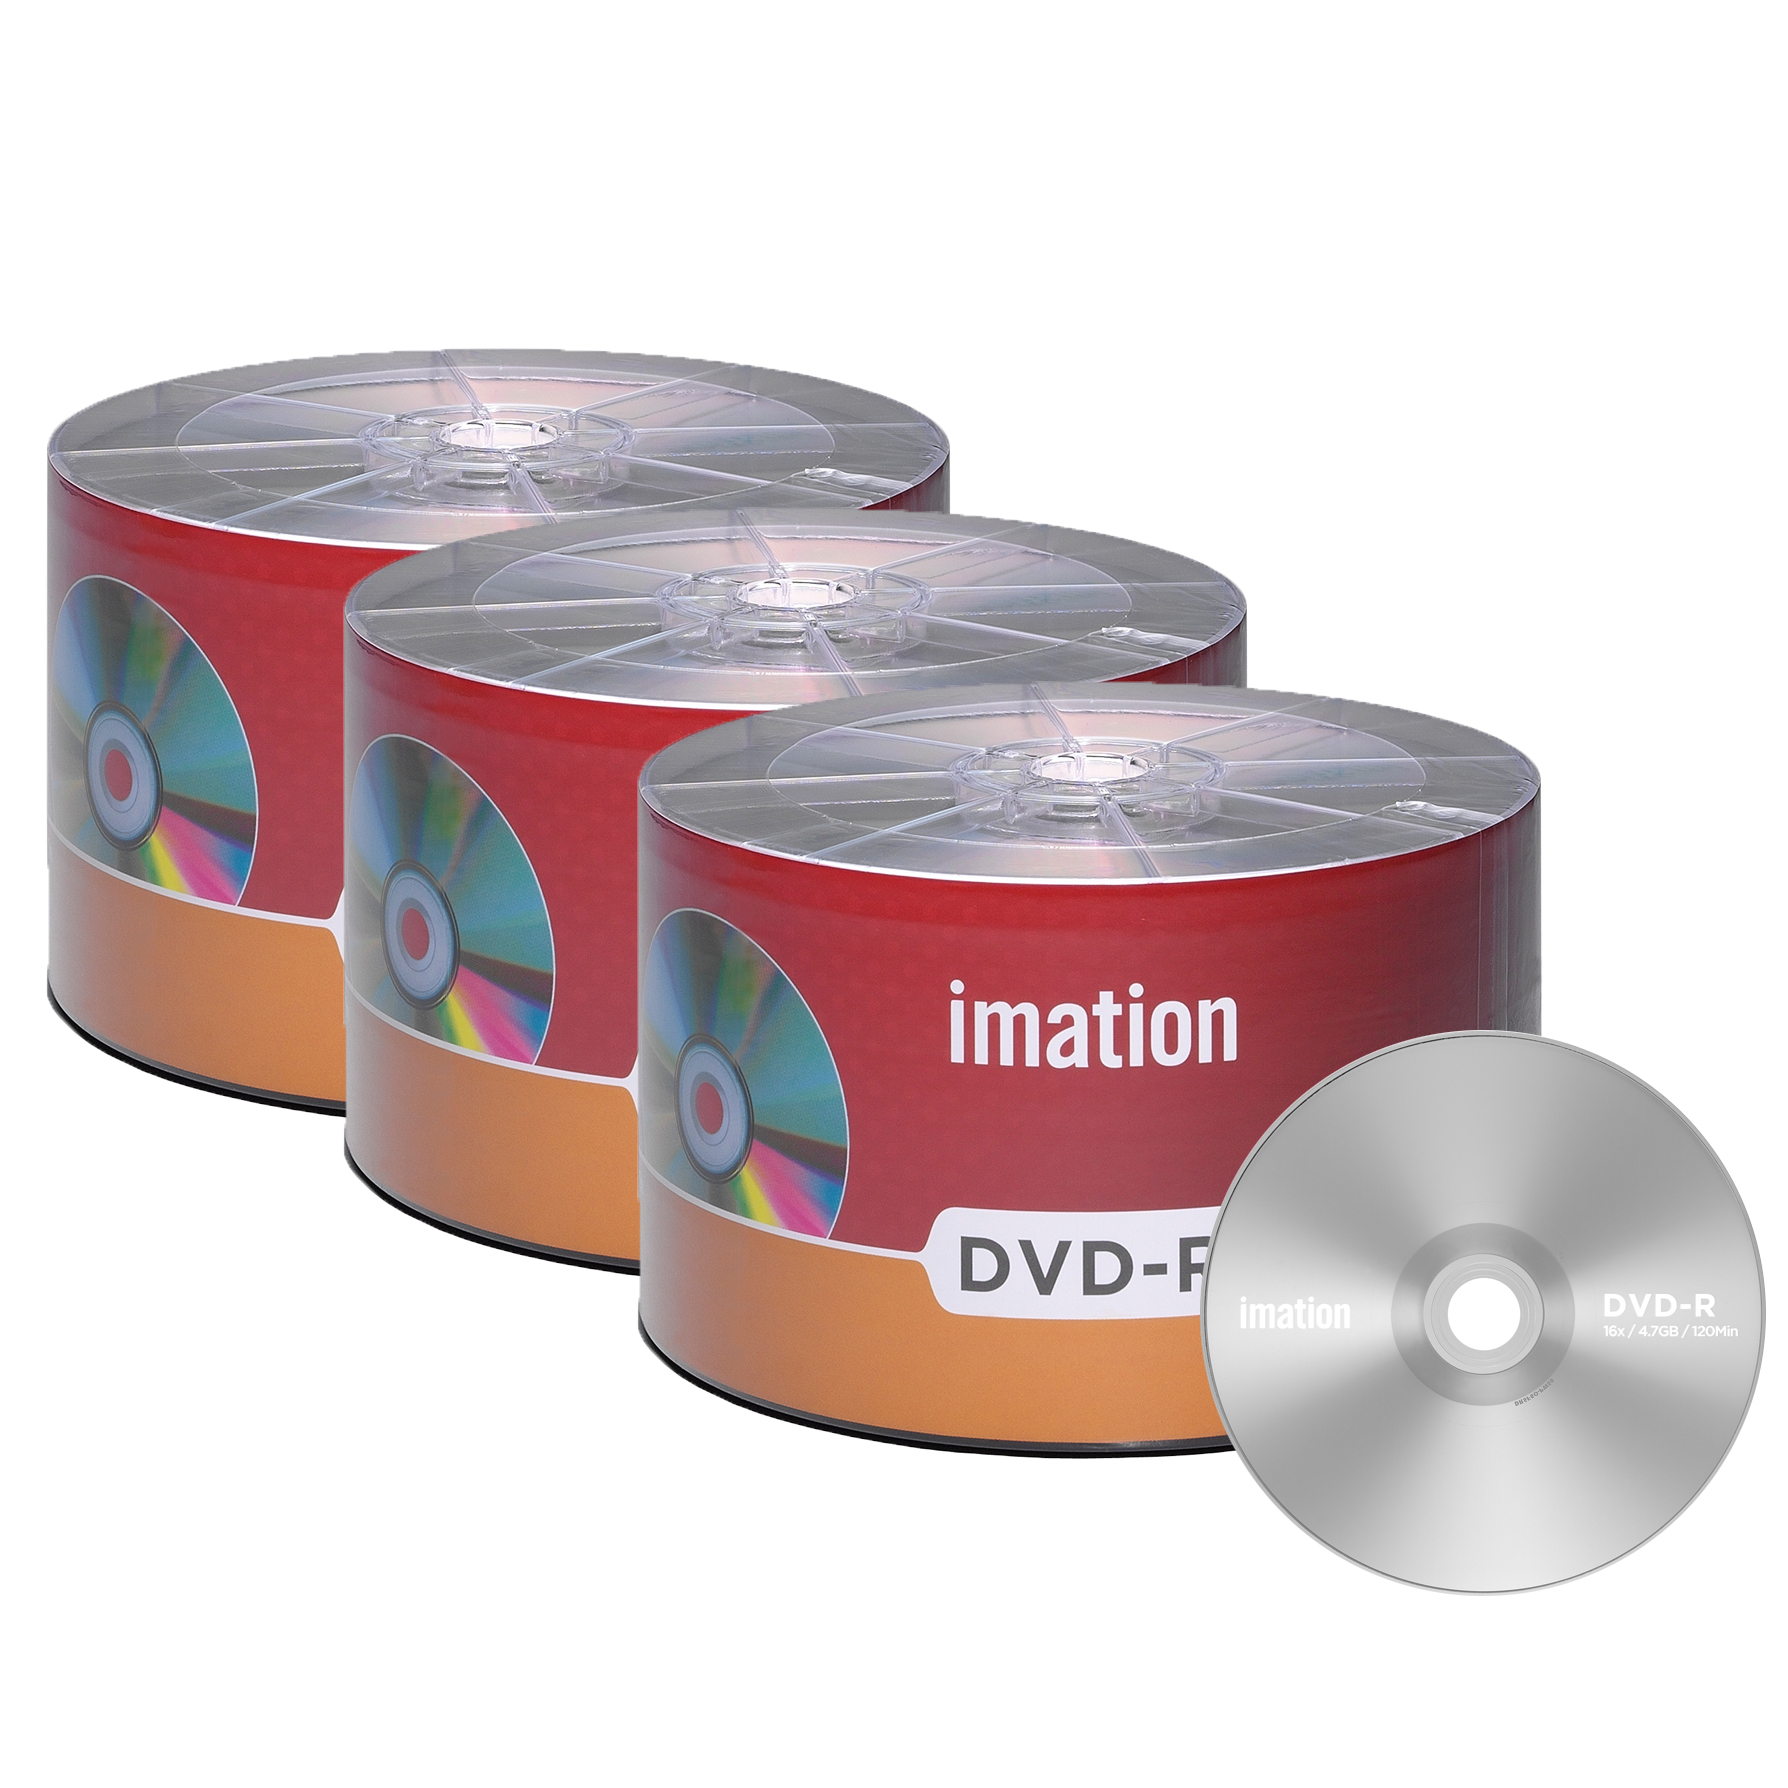 150 Pack Imation DVD-R 16X 4.7GB/120Min Branded Logo Blank Media Recordable Data Disc - image 1 of 2